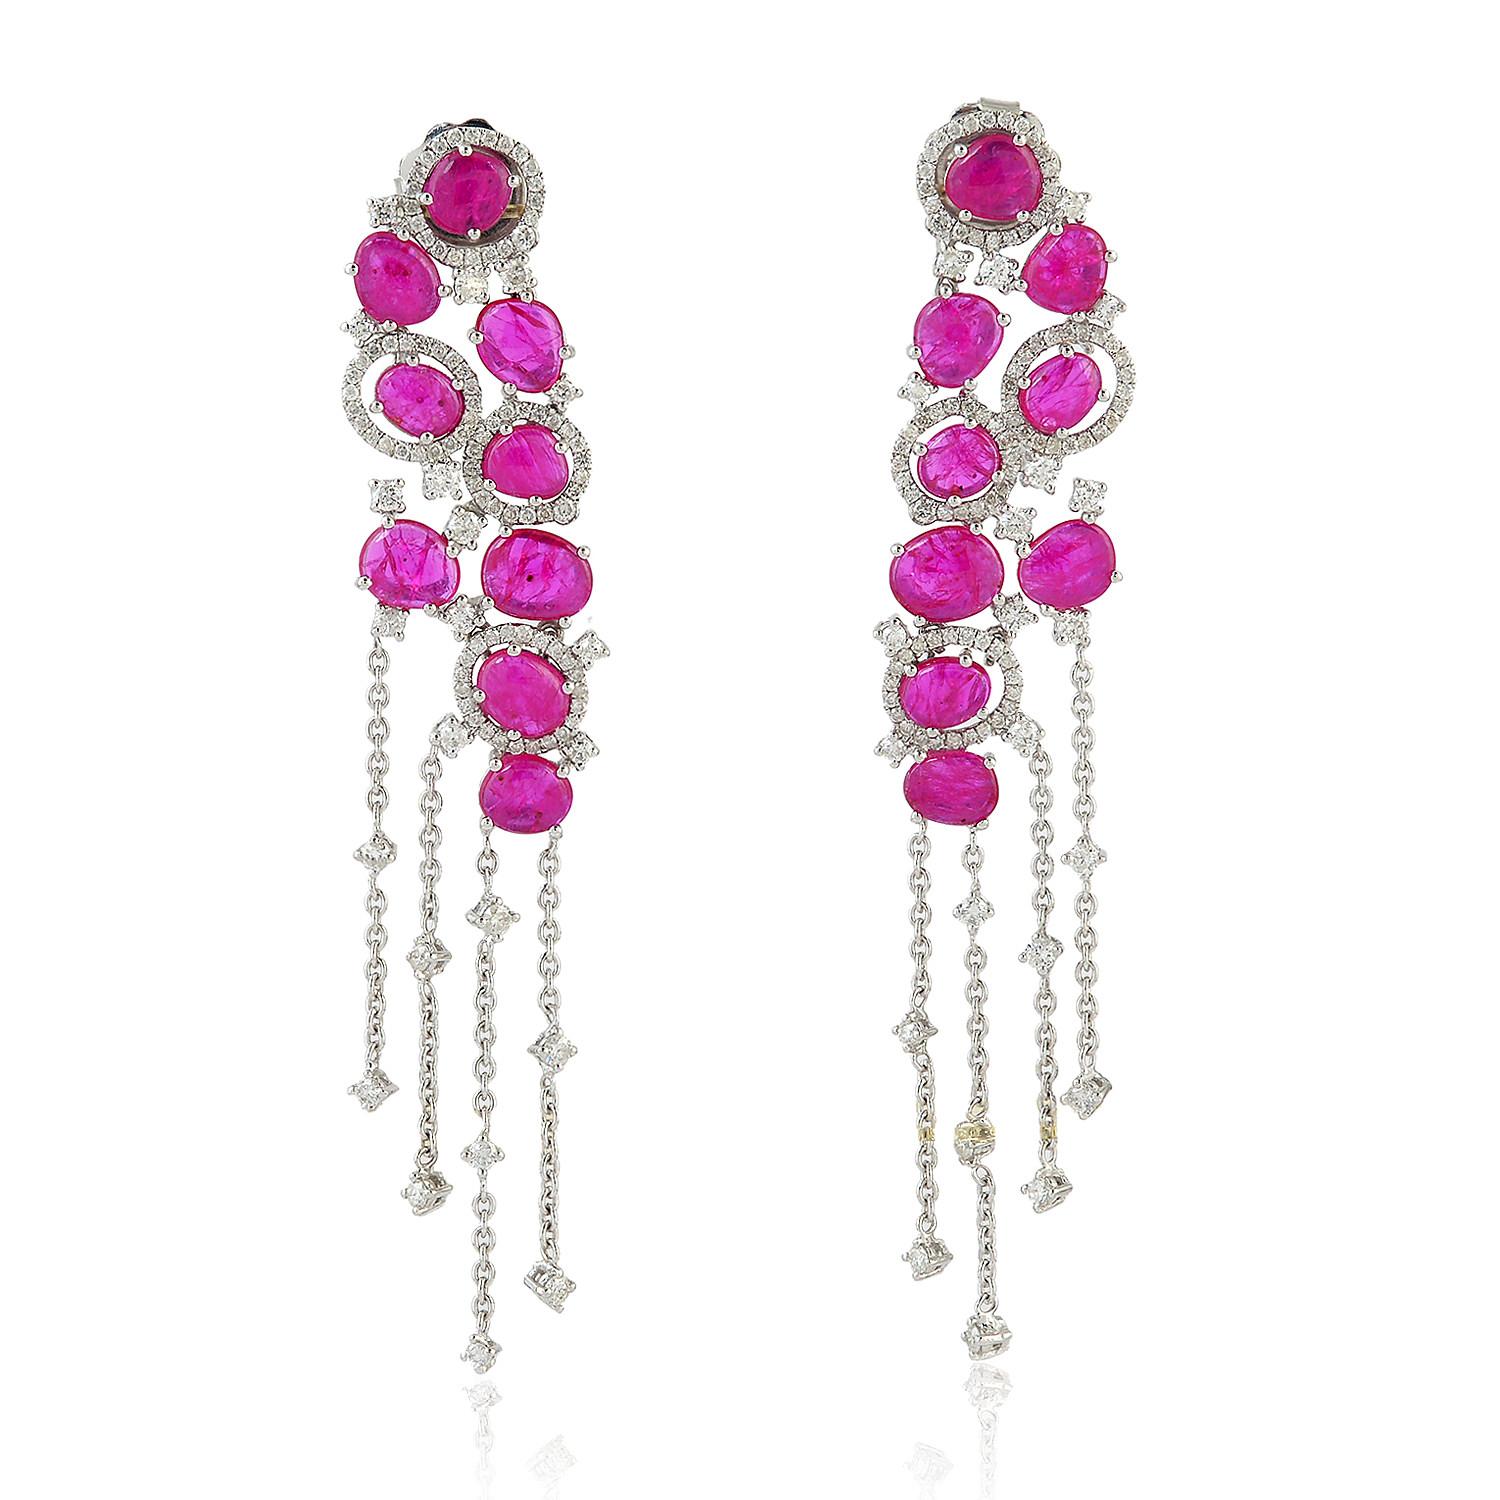 Multi Shaped Ruby Chandelier Earrings With Diamonds Made In 18k White Gold In New Condition For Sale In New York, NY